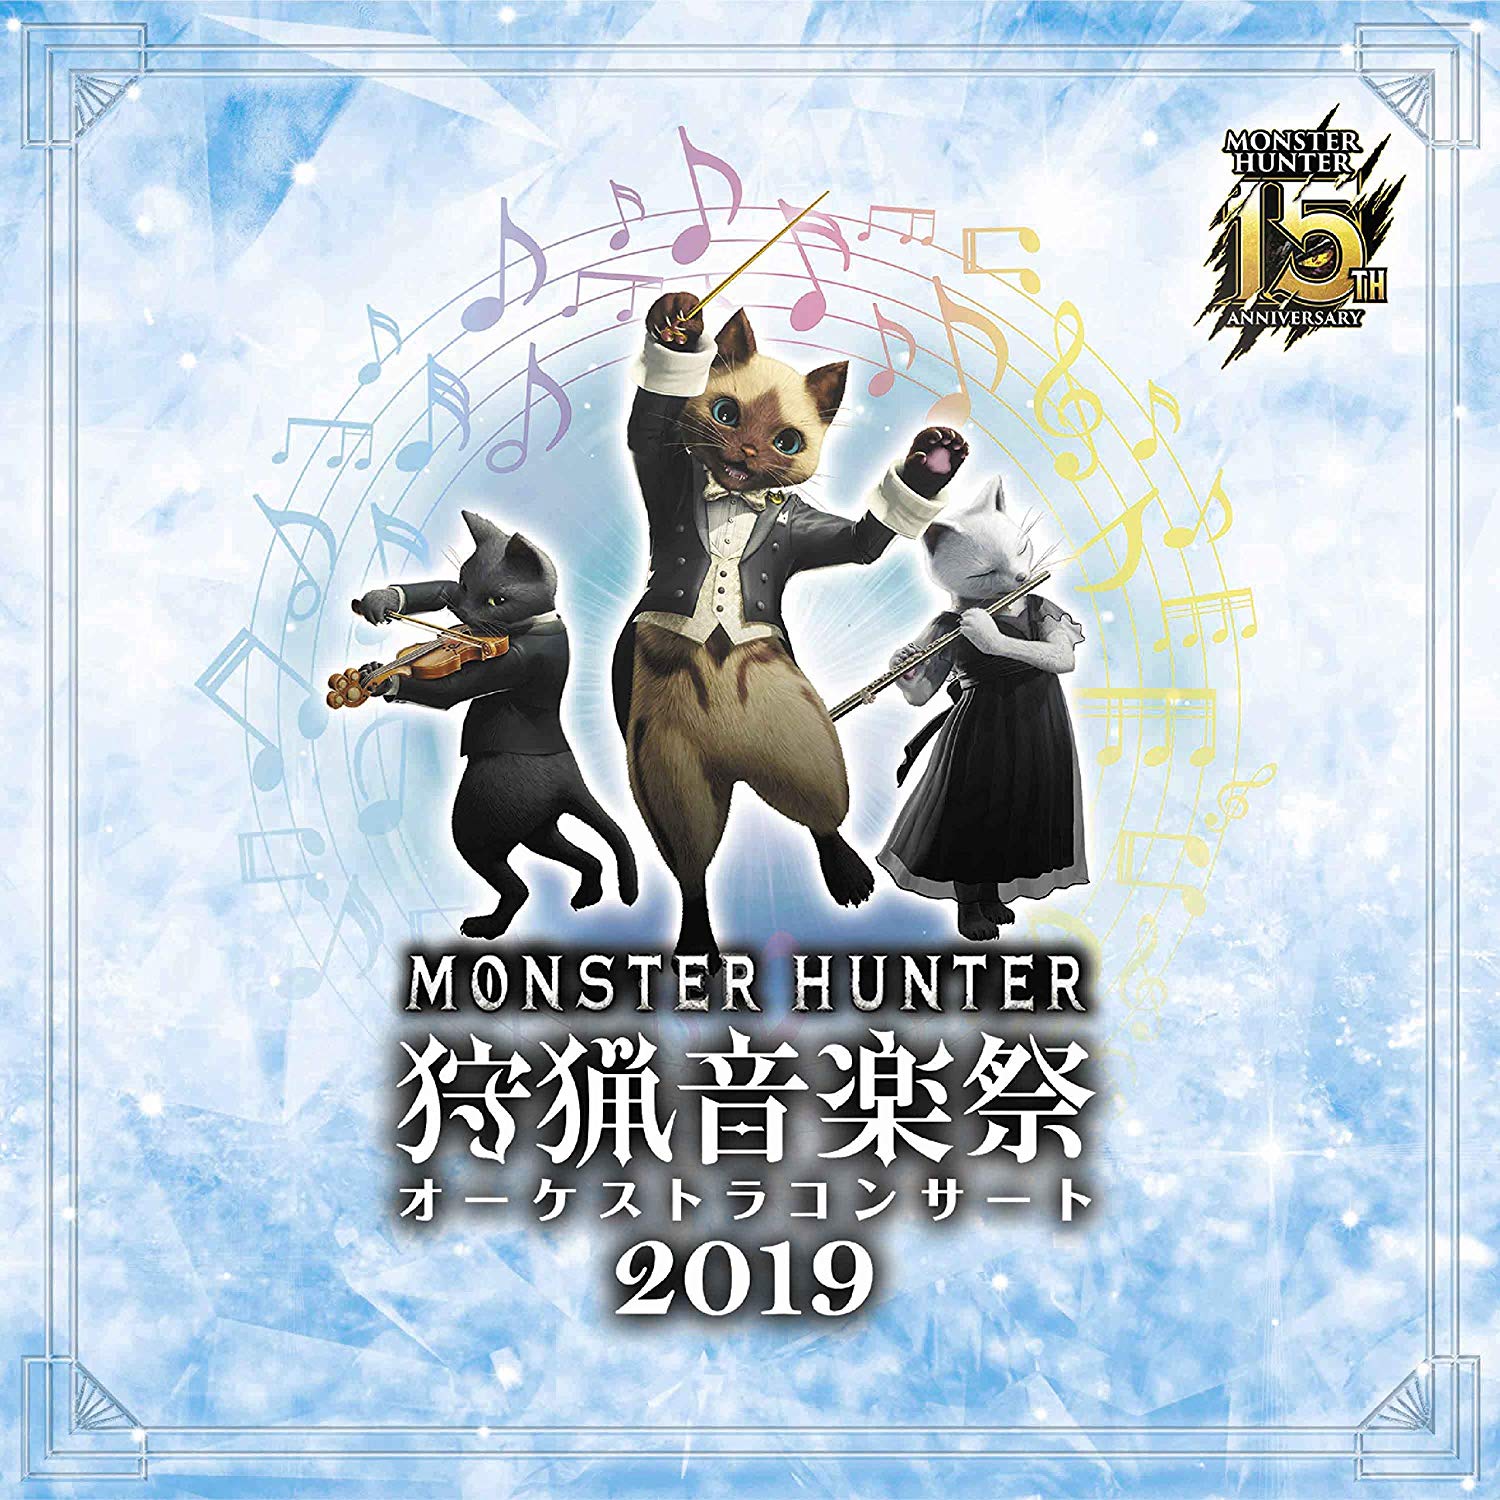 Video Game Soundtrack Monster Hunter 15th Anniversary Orchestra Concert Hunting Music Festival 19 Various Artists